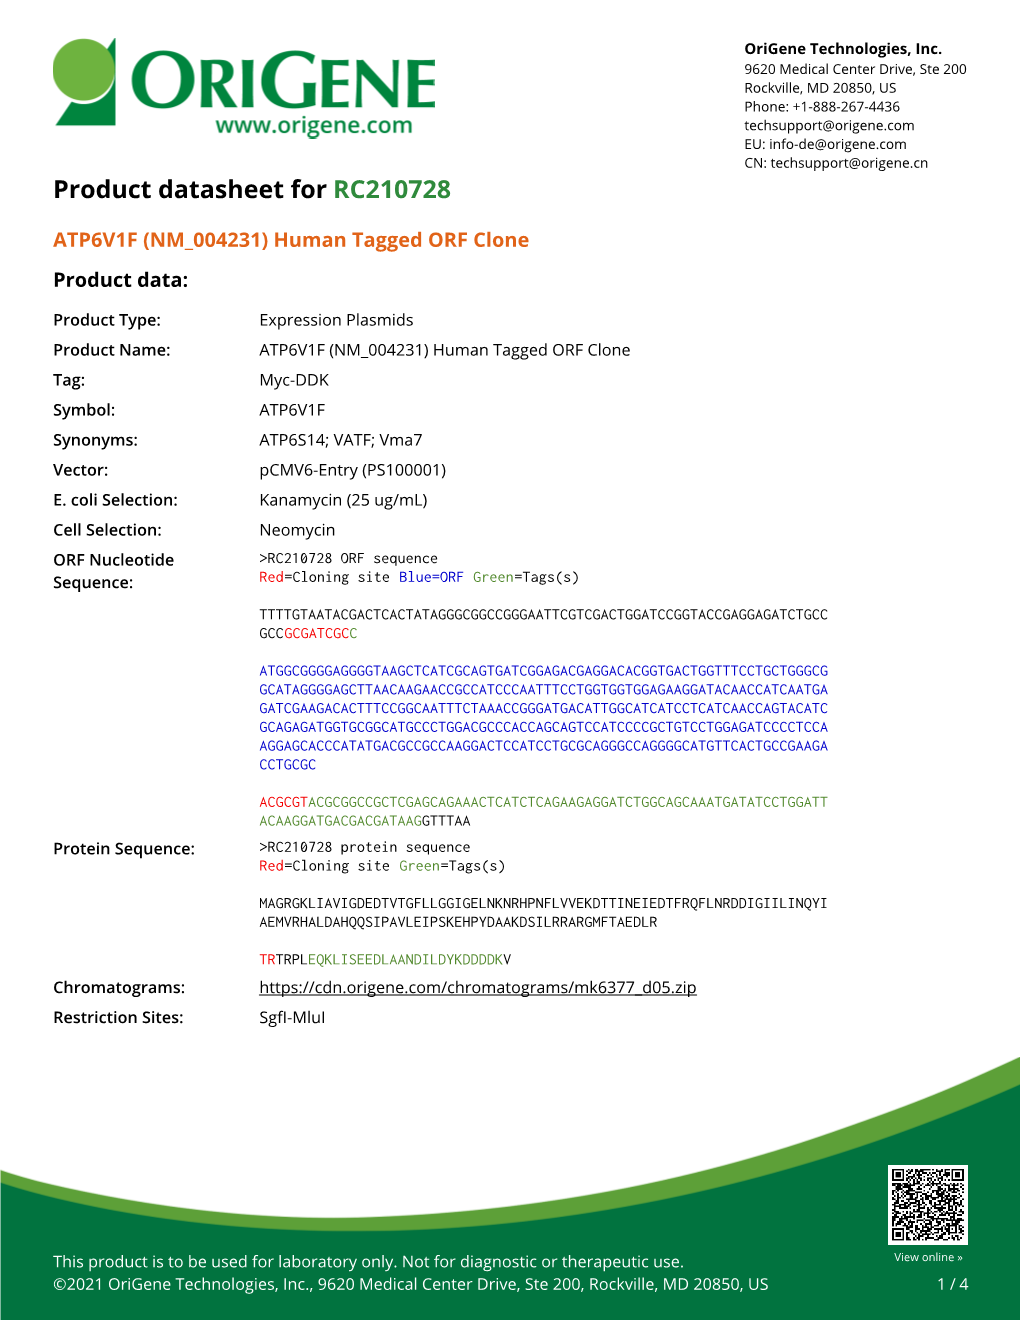 ATP6V1F (NM 004231) Human Tagged ORF Clone Product Data